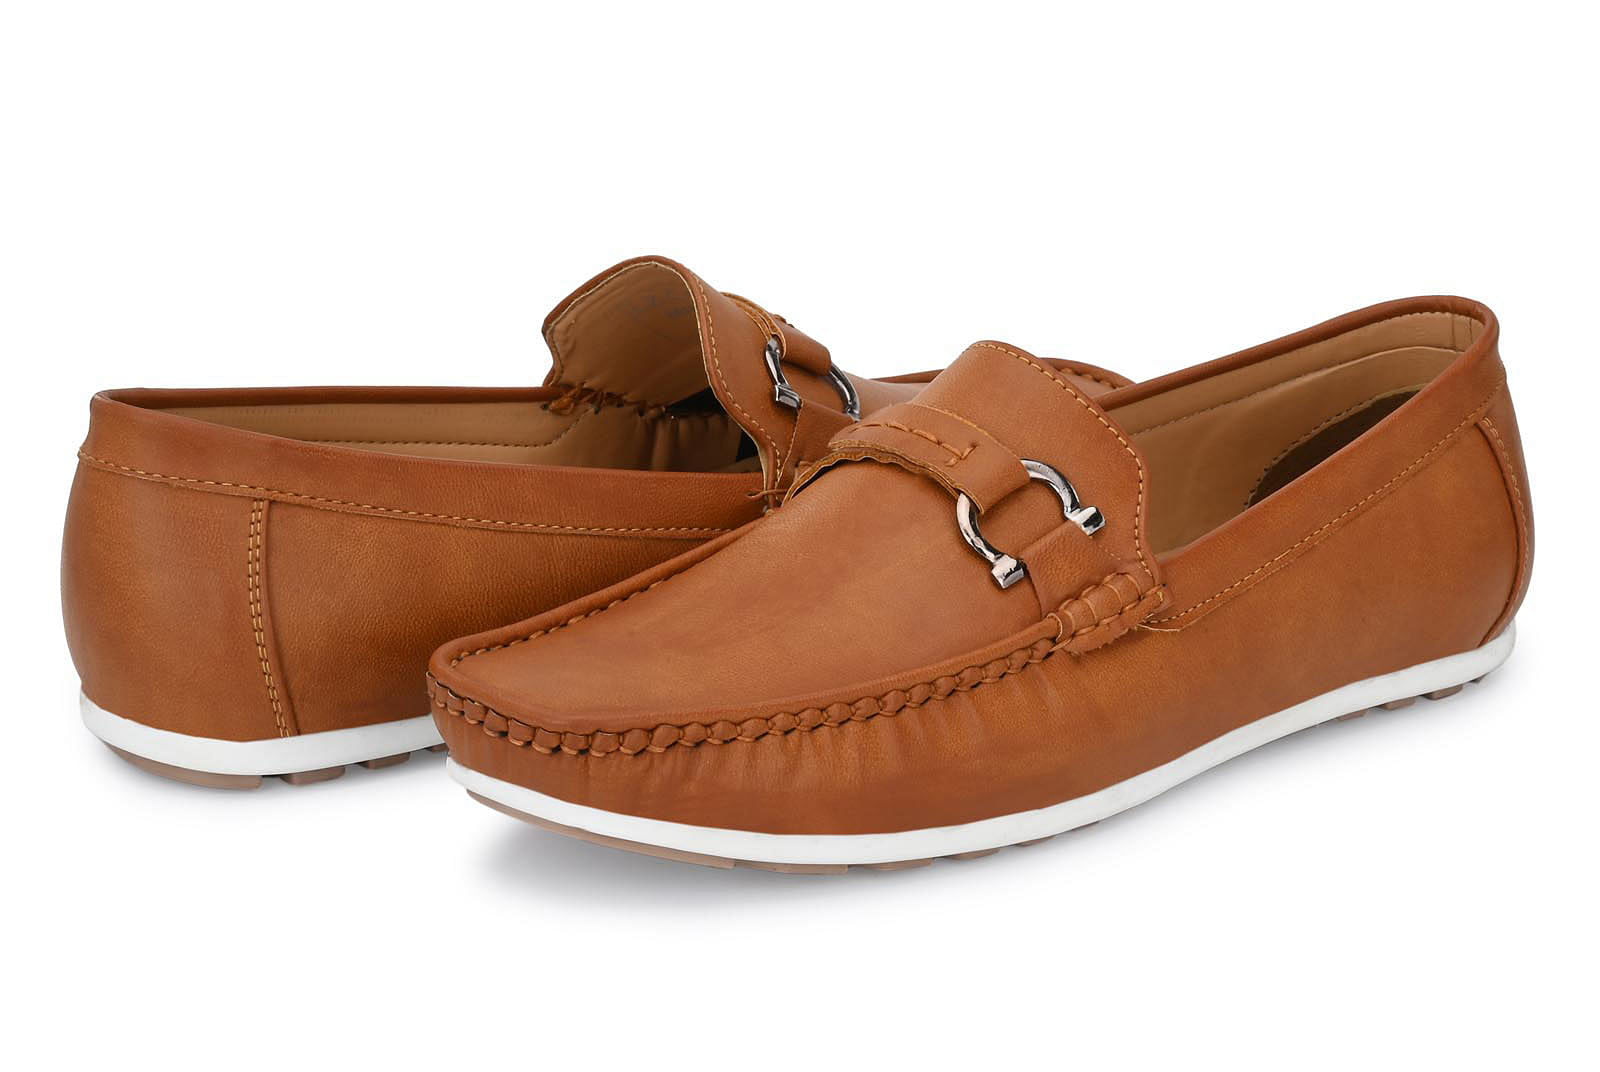 Pair-it Men's Loafers Shoes - Tan - LZ-Loafer102